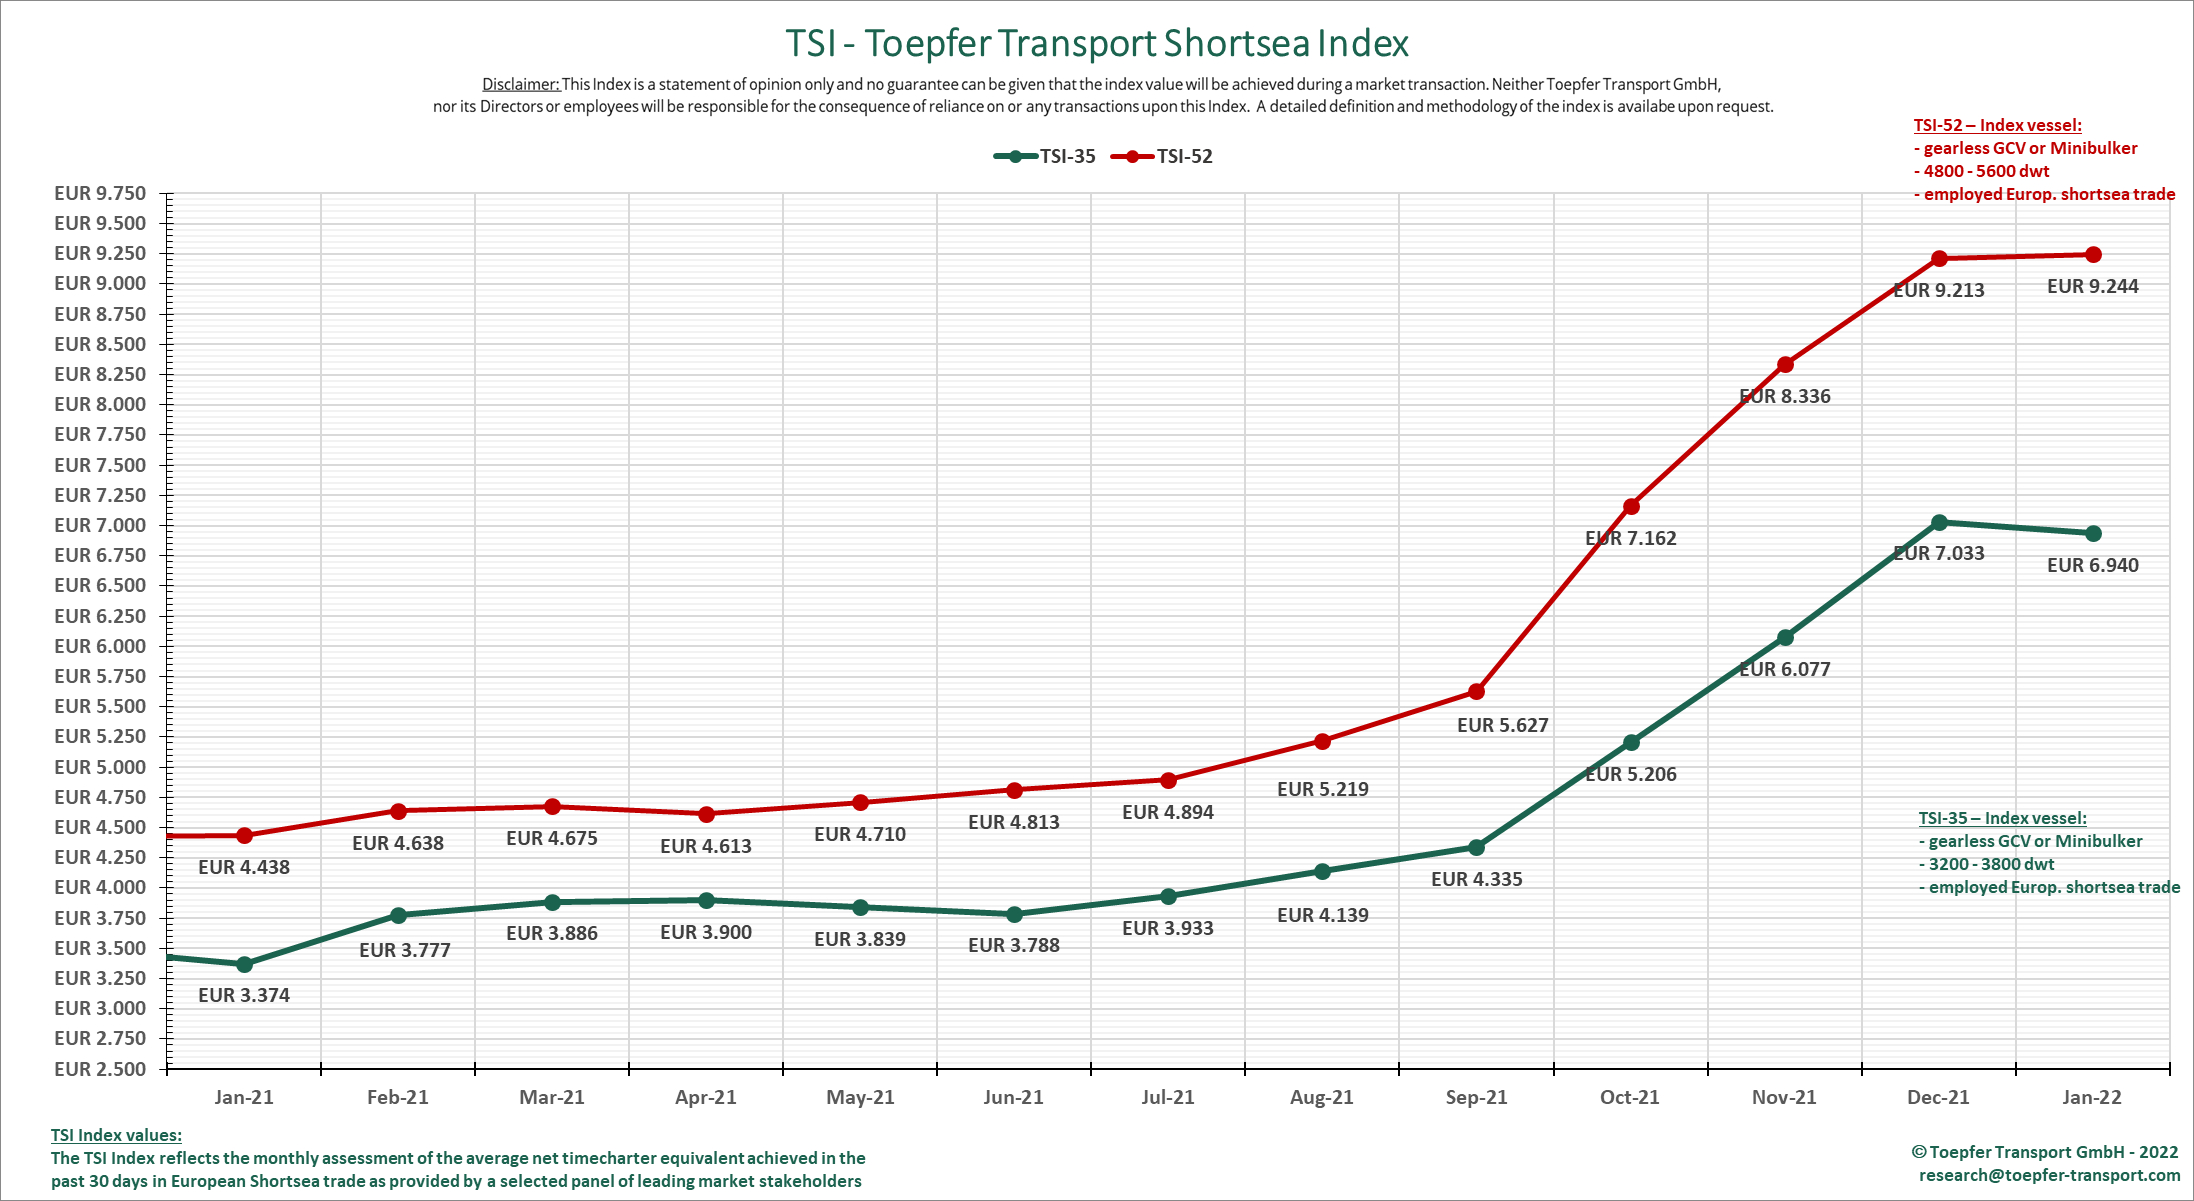 Toepfer Transport: European shortsea markets' reaction to political issues unclear